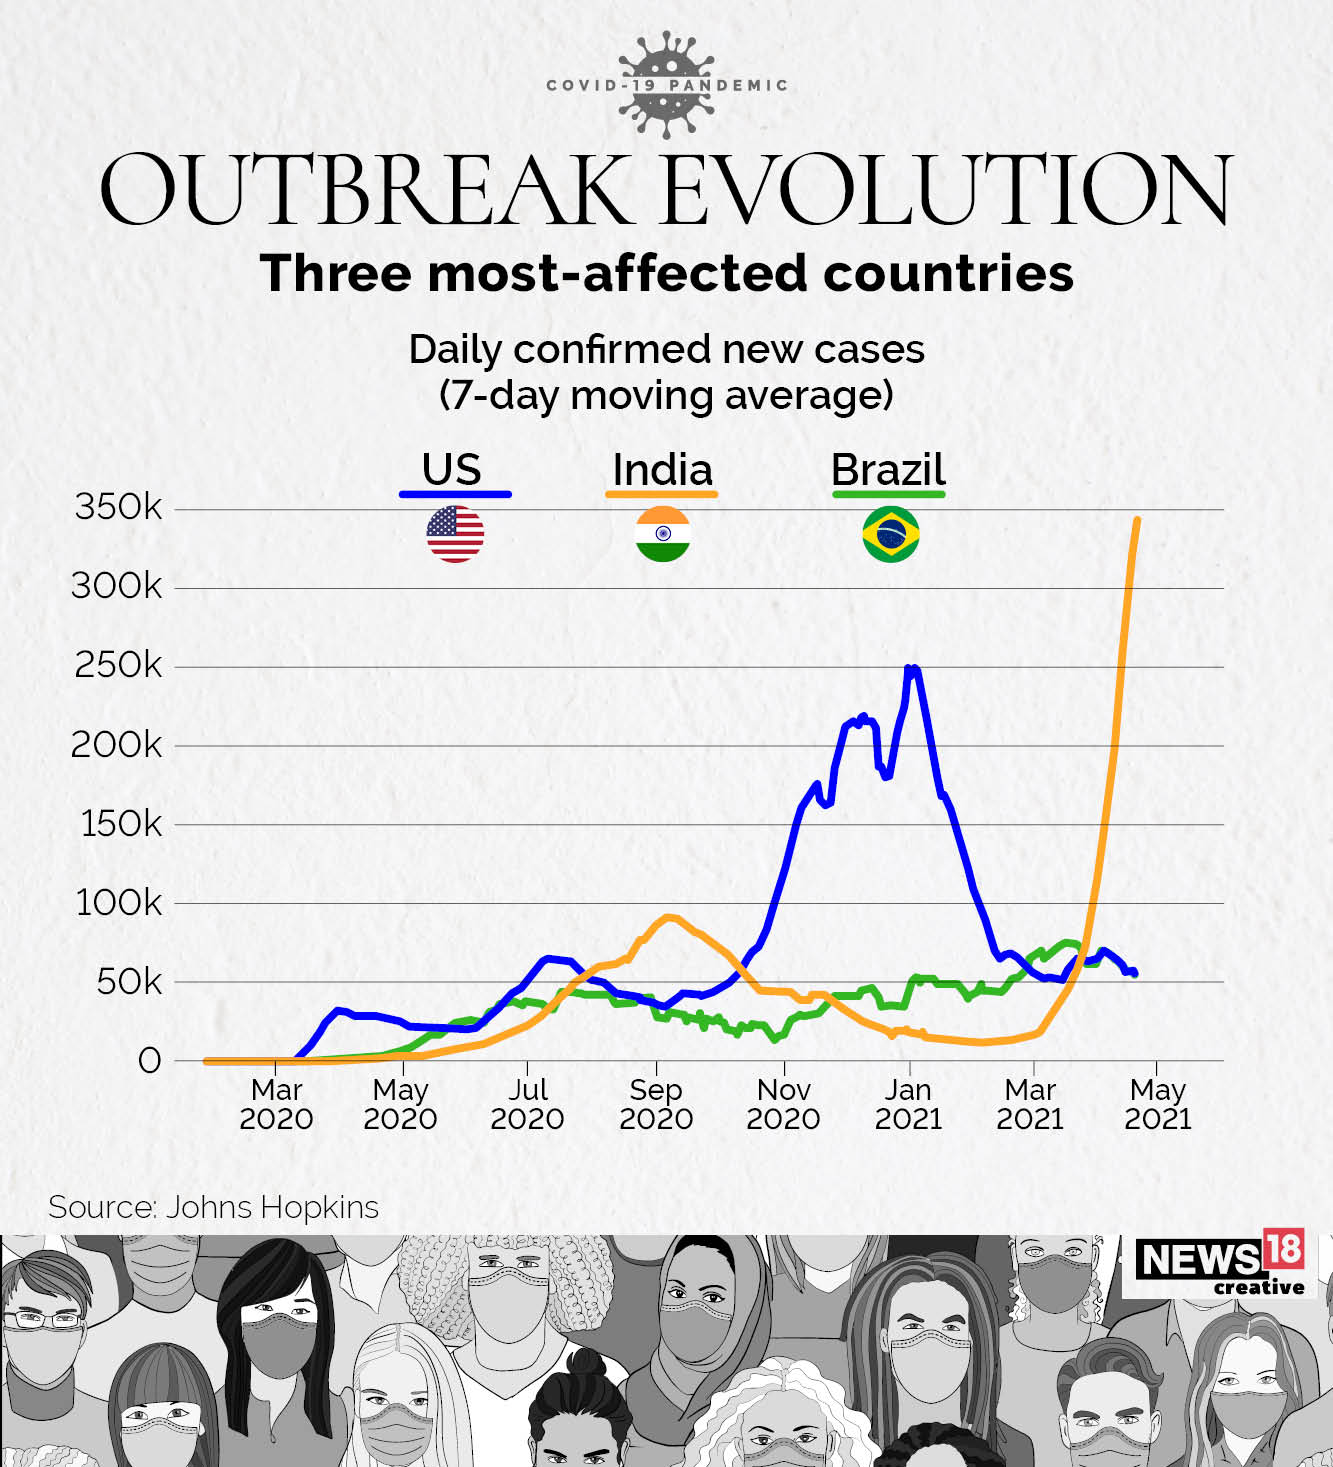 From March 2020 to now: How has pandemic evolved in the three most-affected countries?